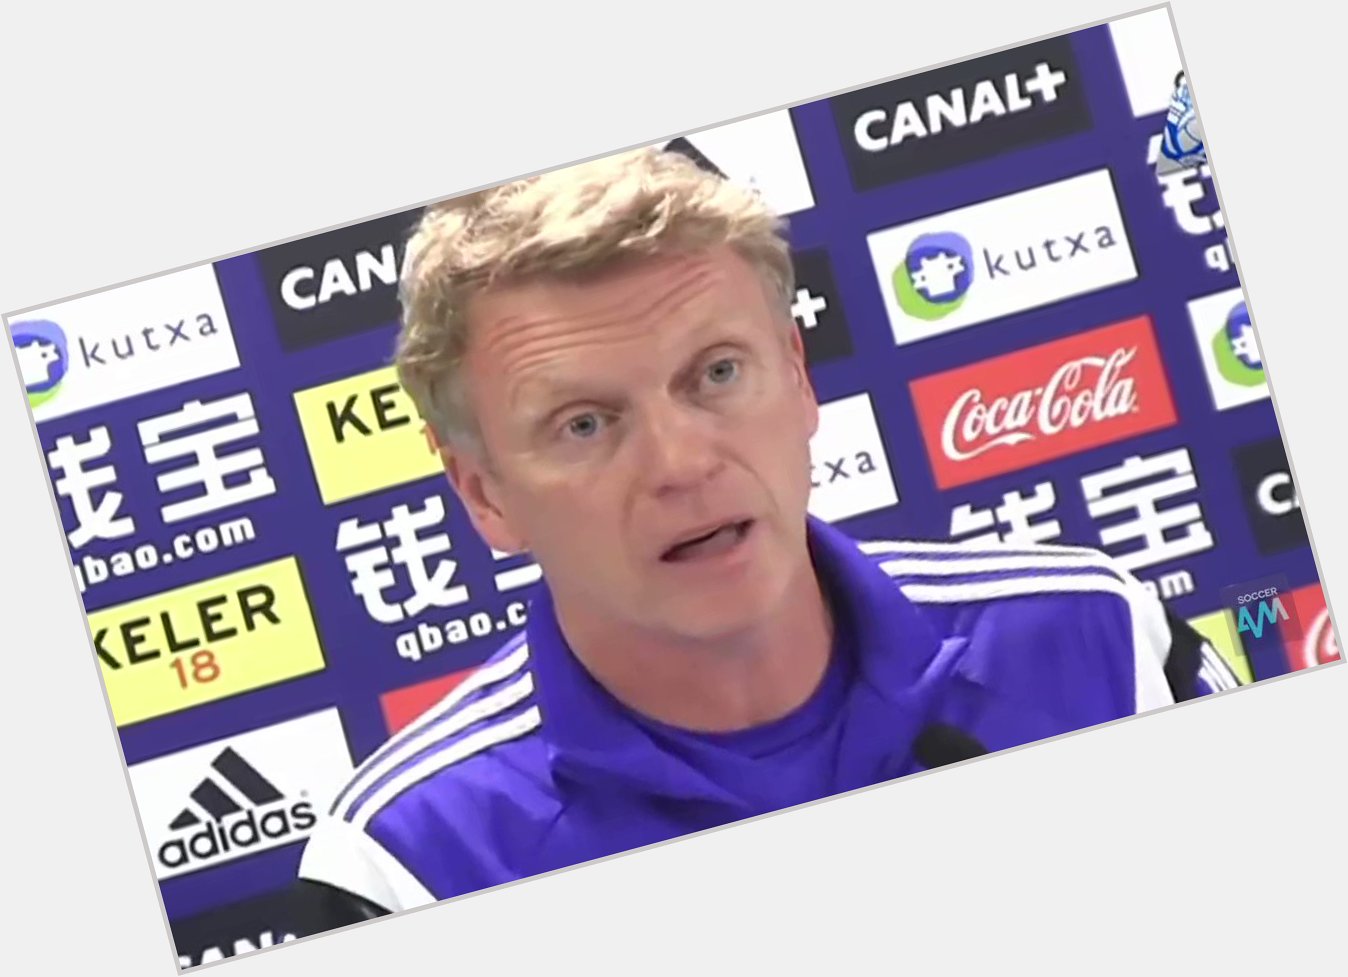  Happy 59th birthday to David Moyes

This video would convince anyone that he\s Spanish. Fluent  